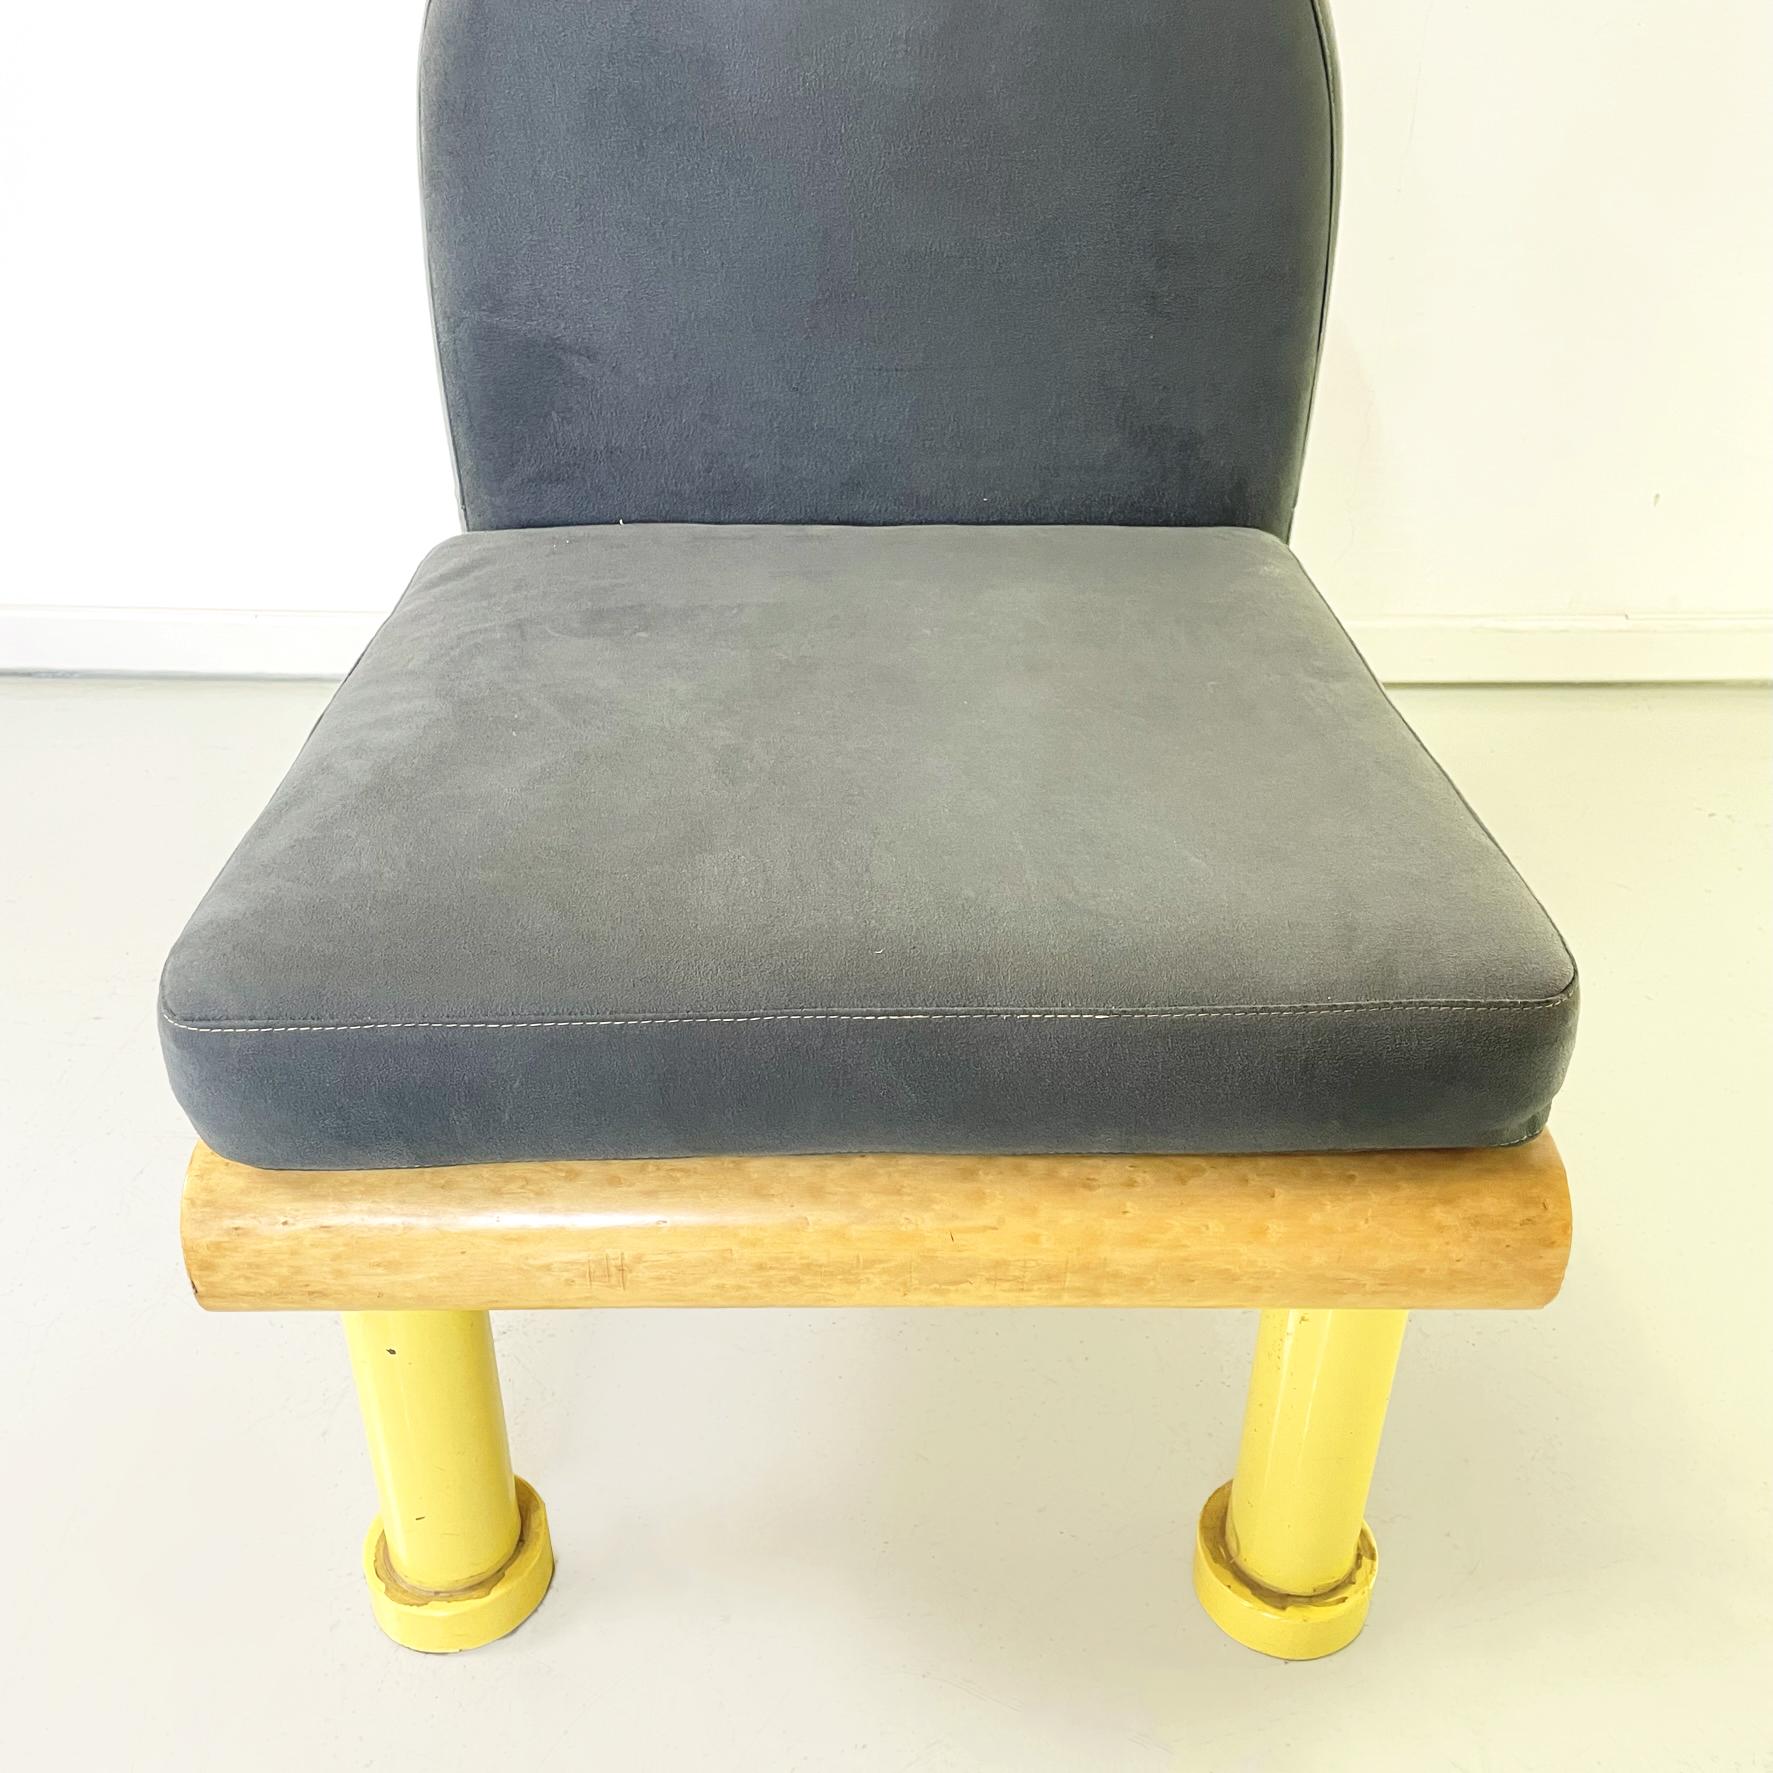 Italian Modern Chair in Gray Velvet, Briar Wood and Yellow Metal, 1980s For Sale 4